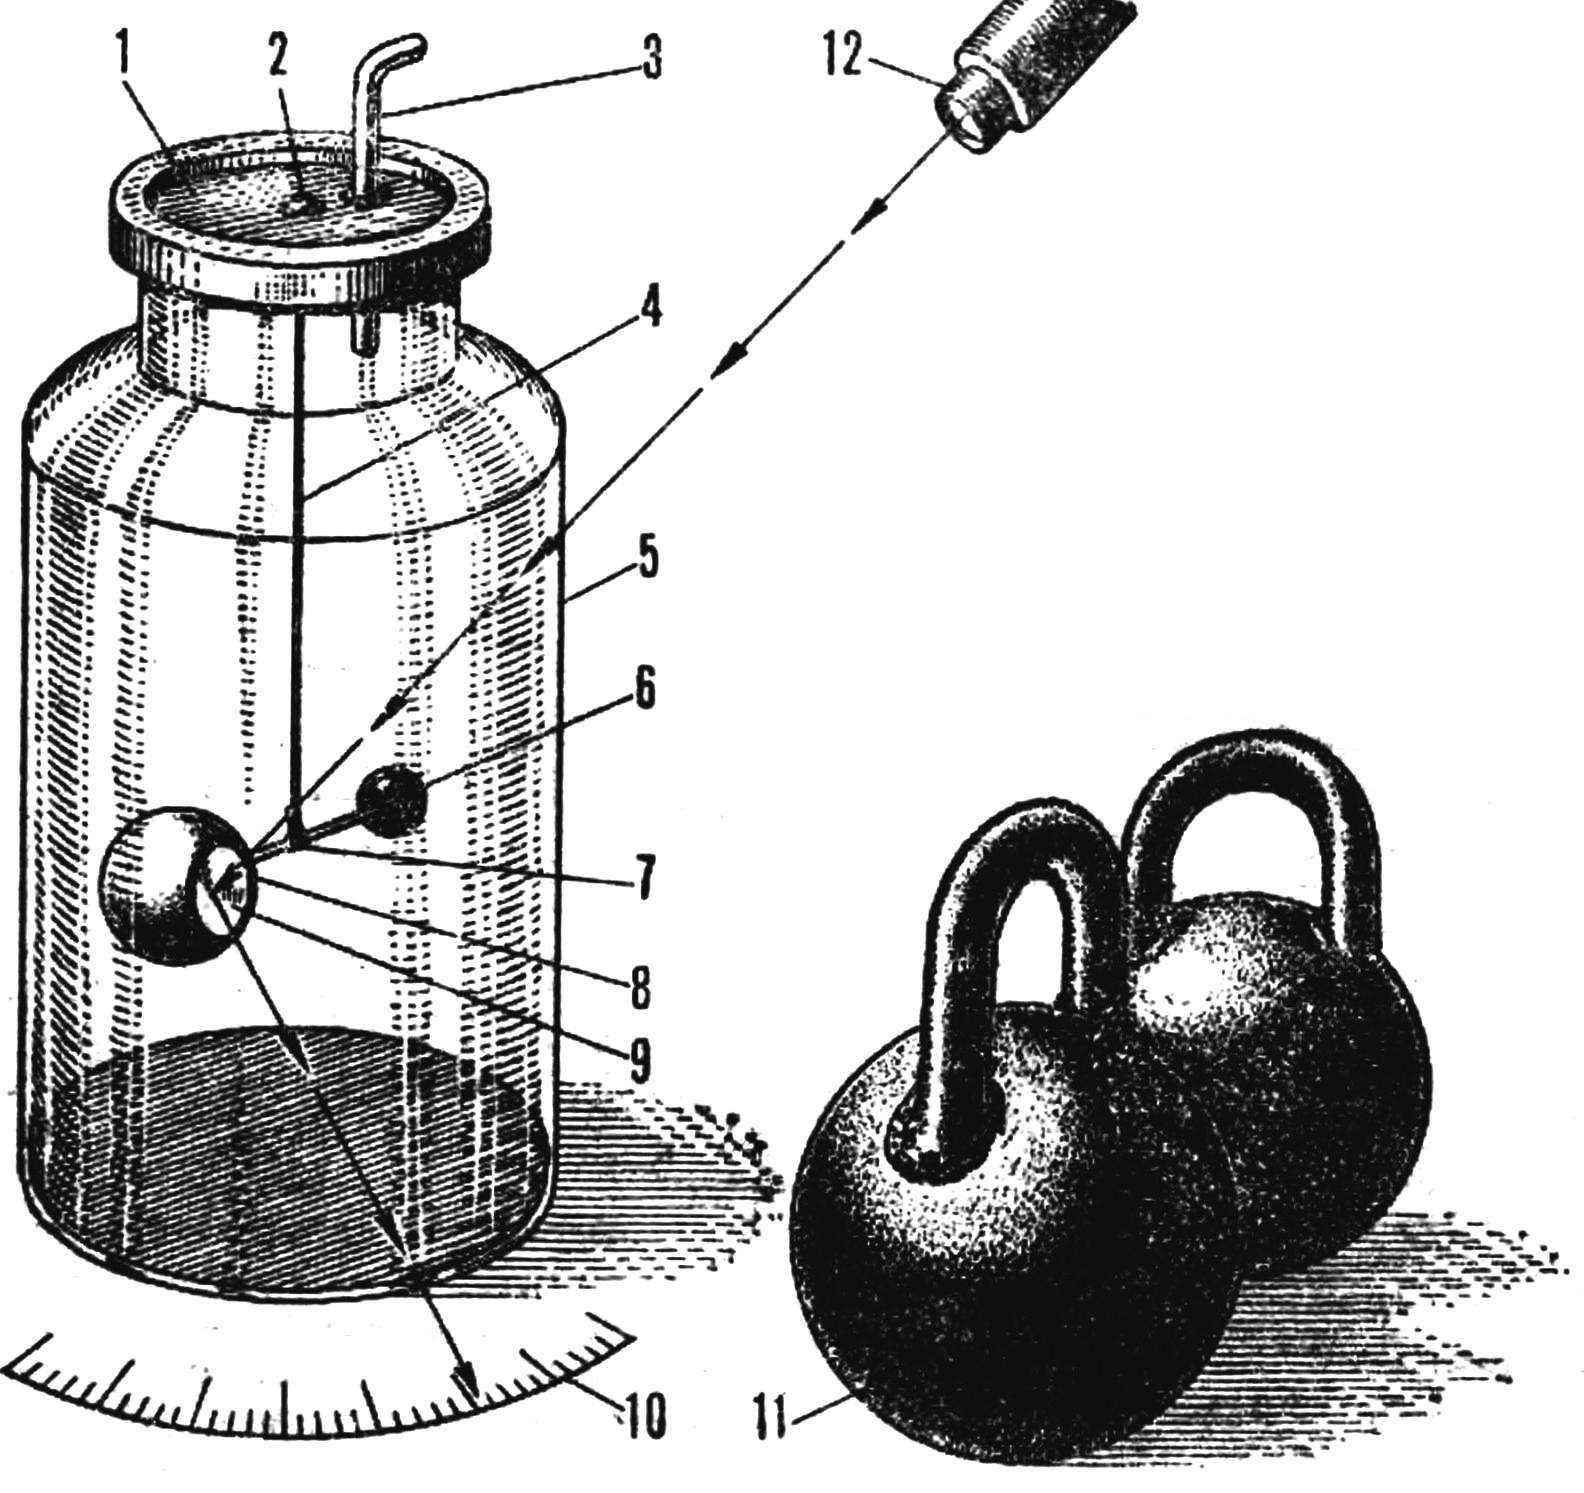 A device to demonstrate the phenomenon of gravity